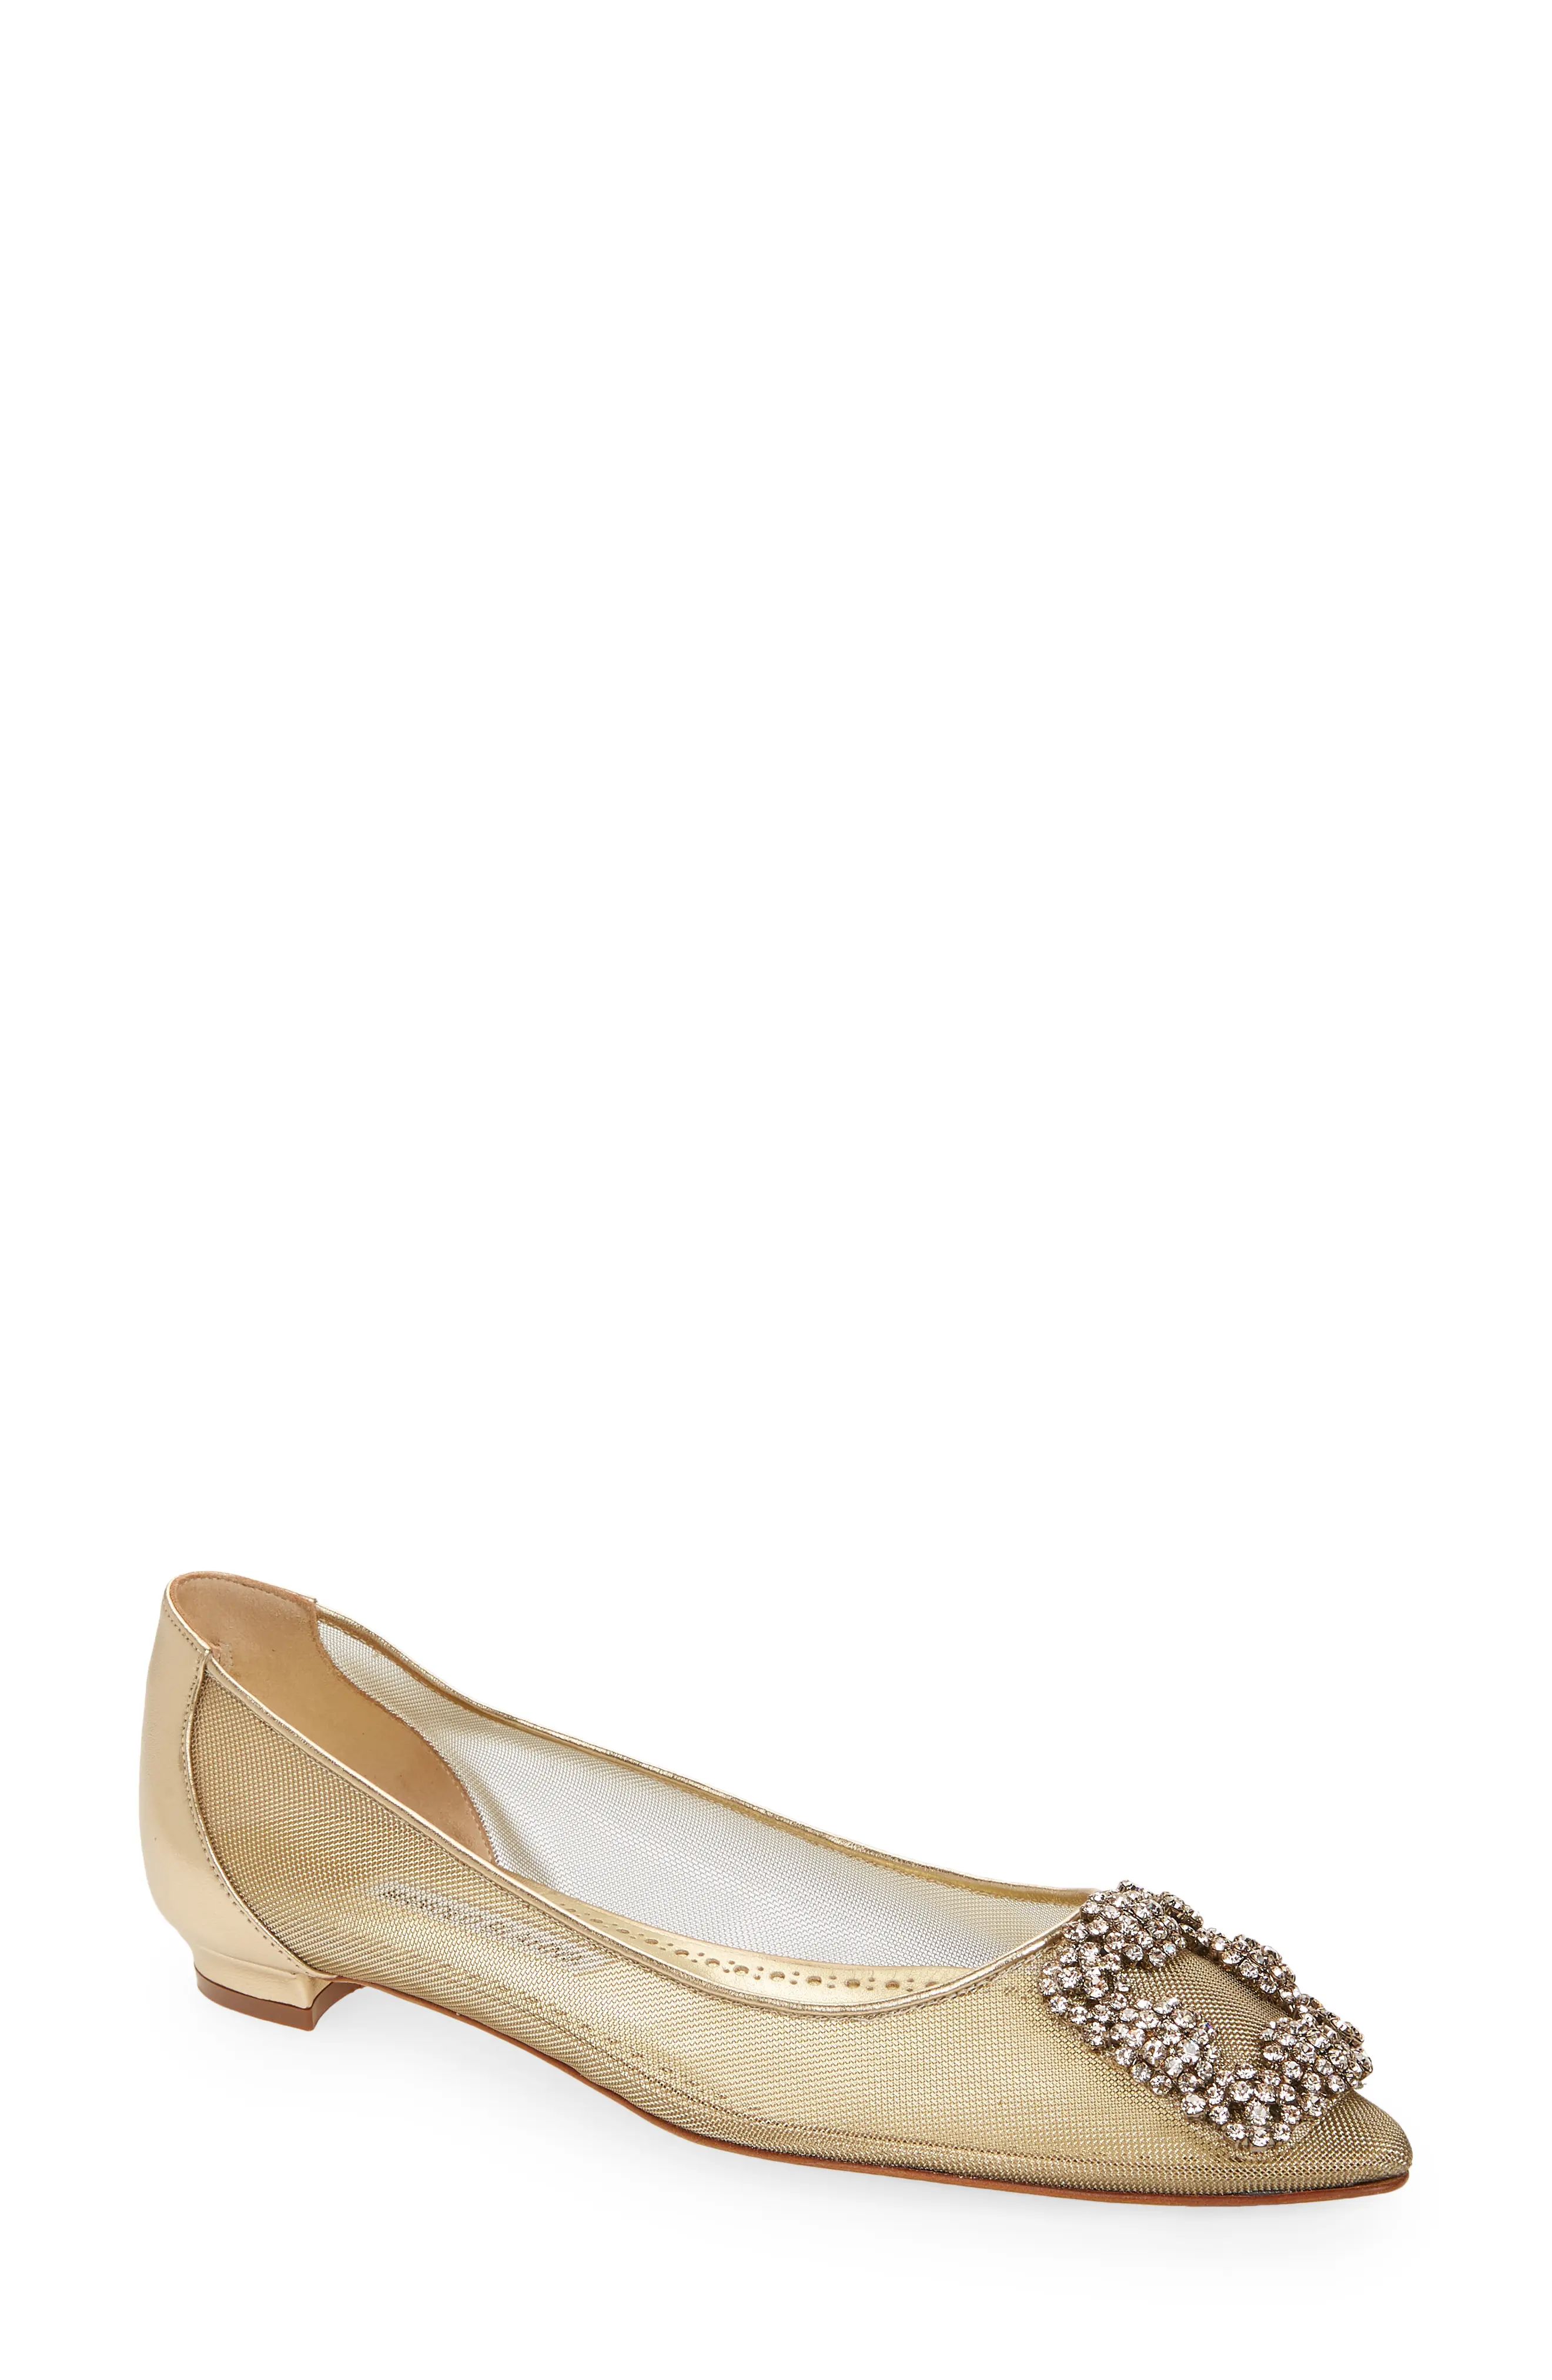 Manolo Blahnik Hangisi Crystal Buckle Mesh Flat in Gold at Nordstrom, Size 7Us | Nordstrom